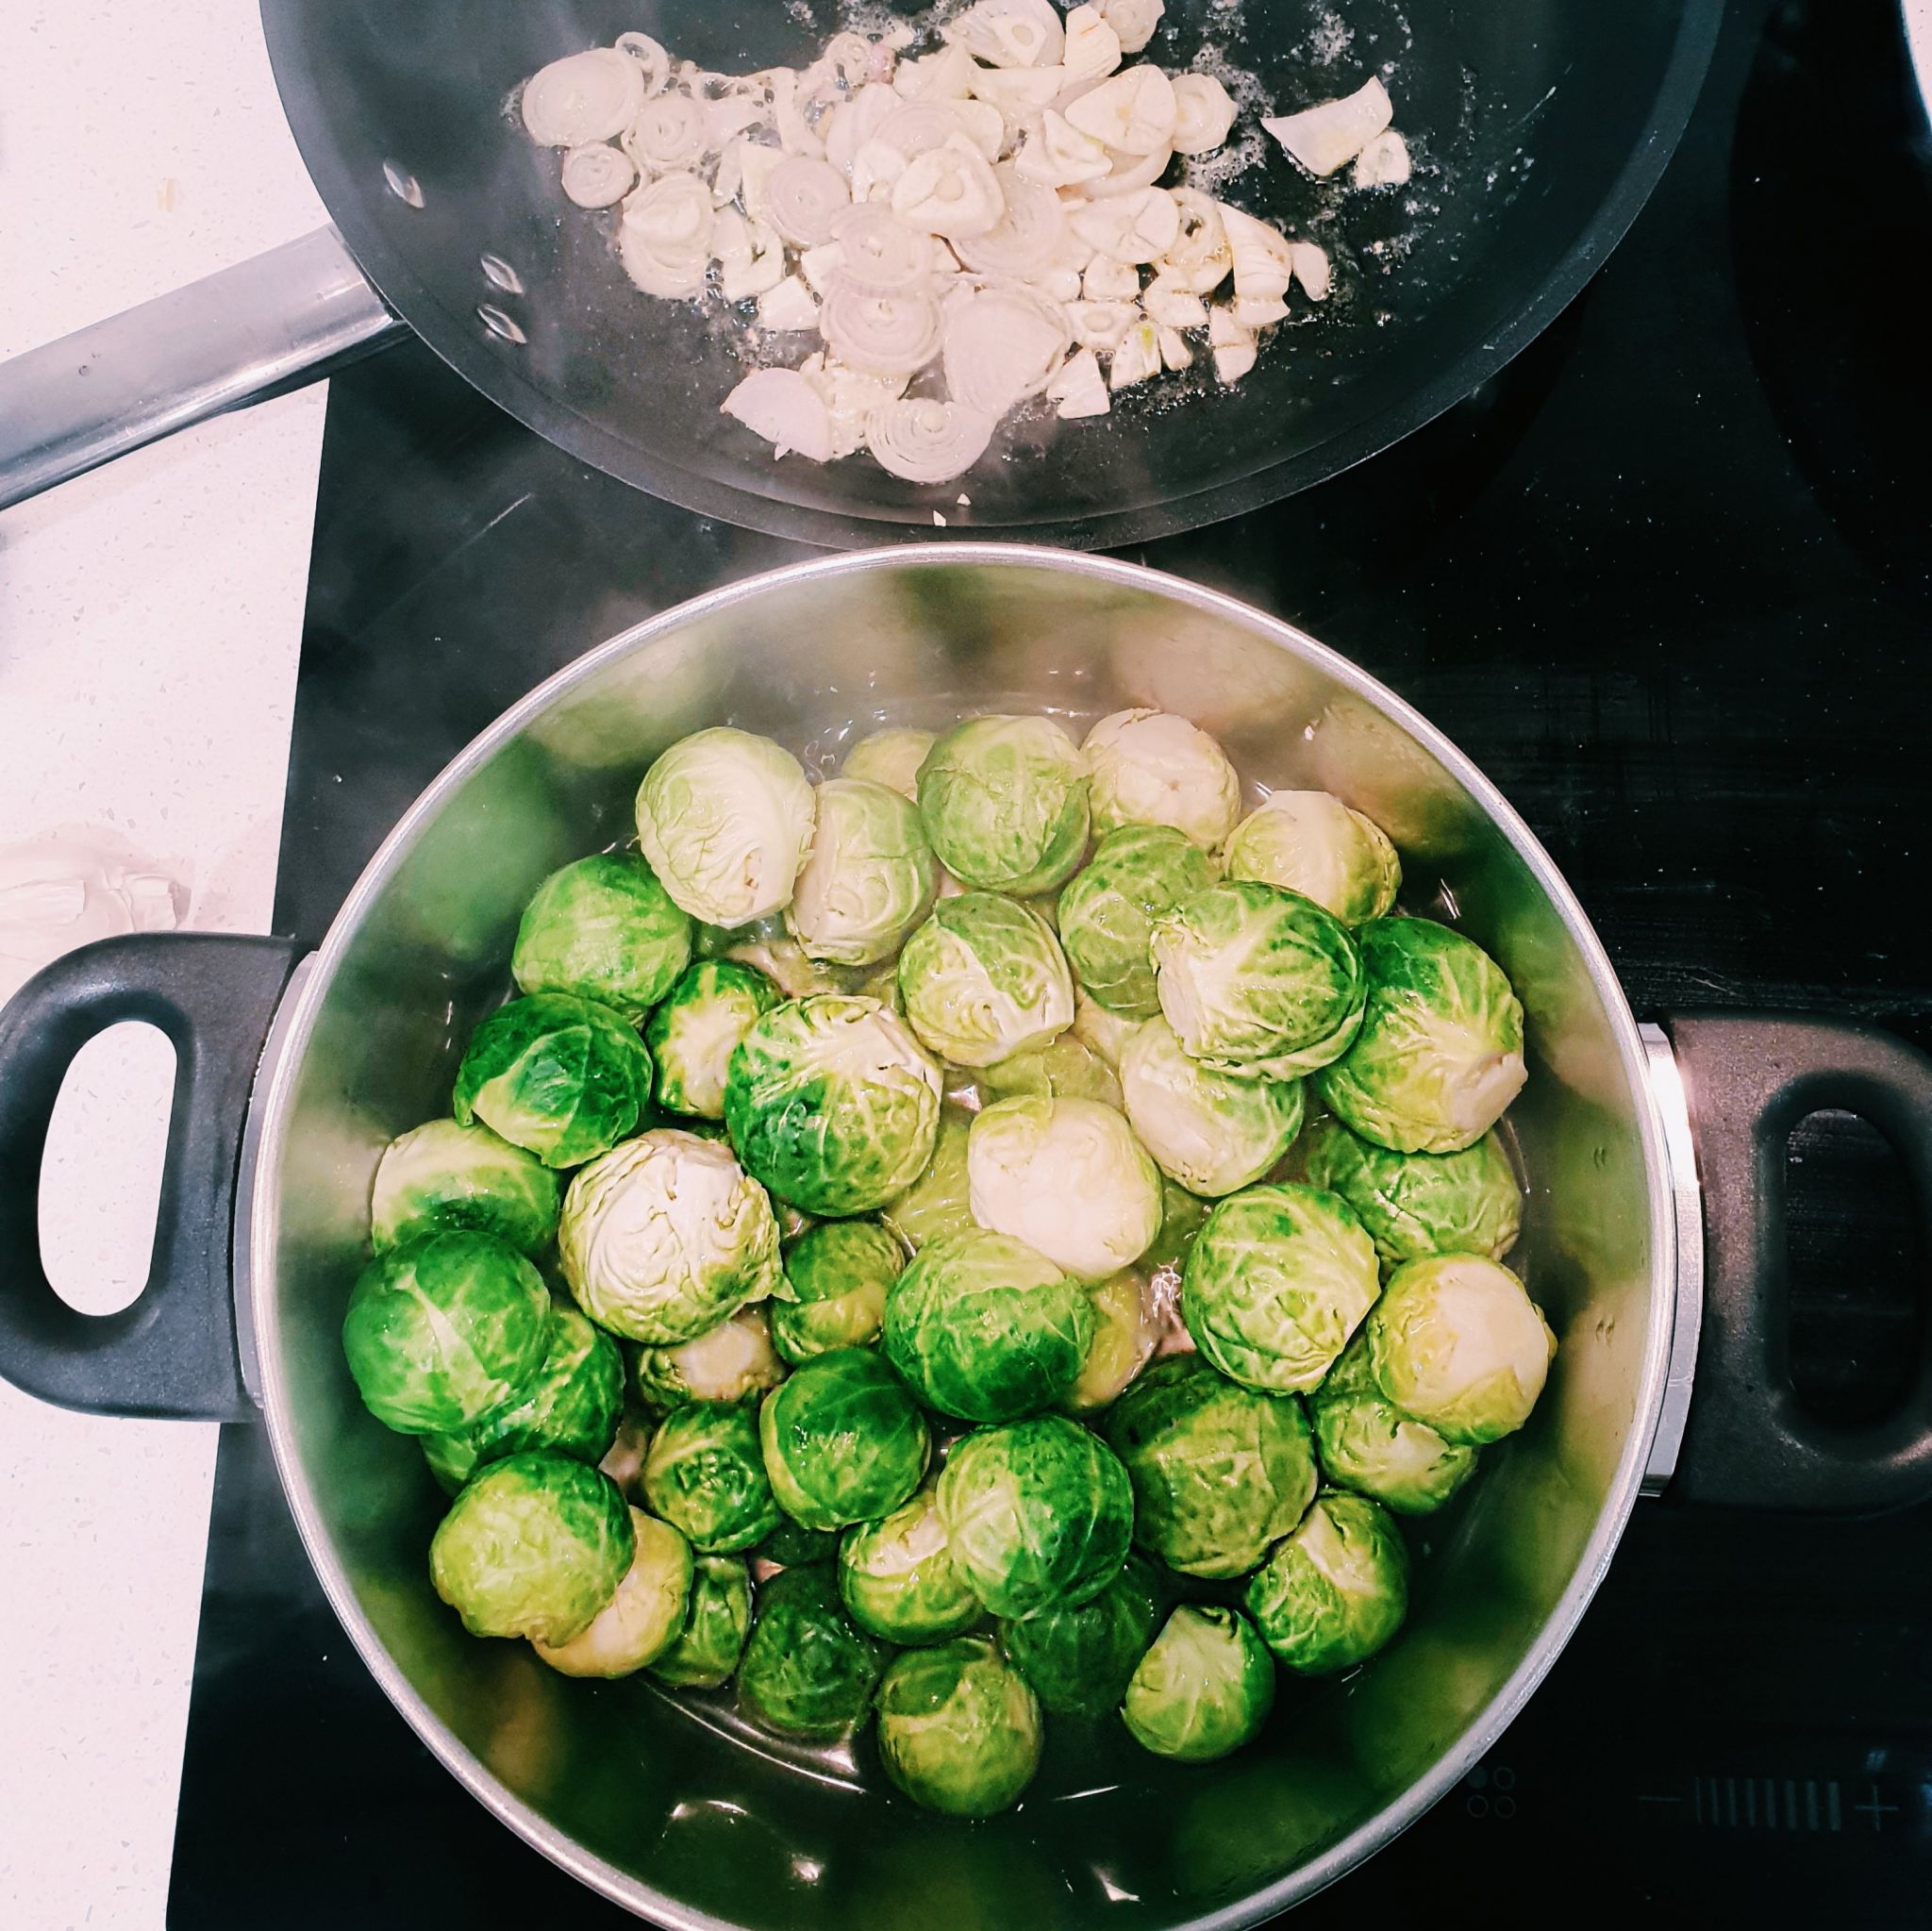 Brussel sprouts in boiling water